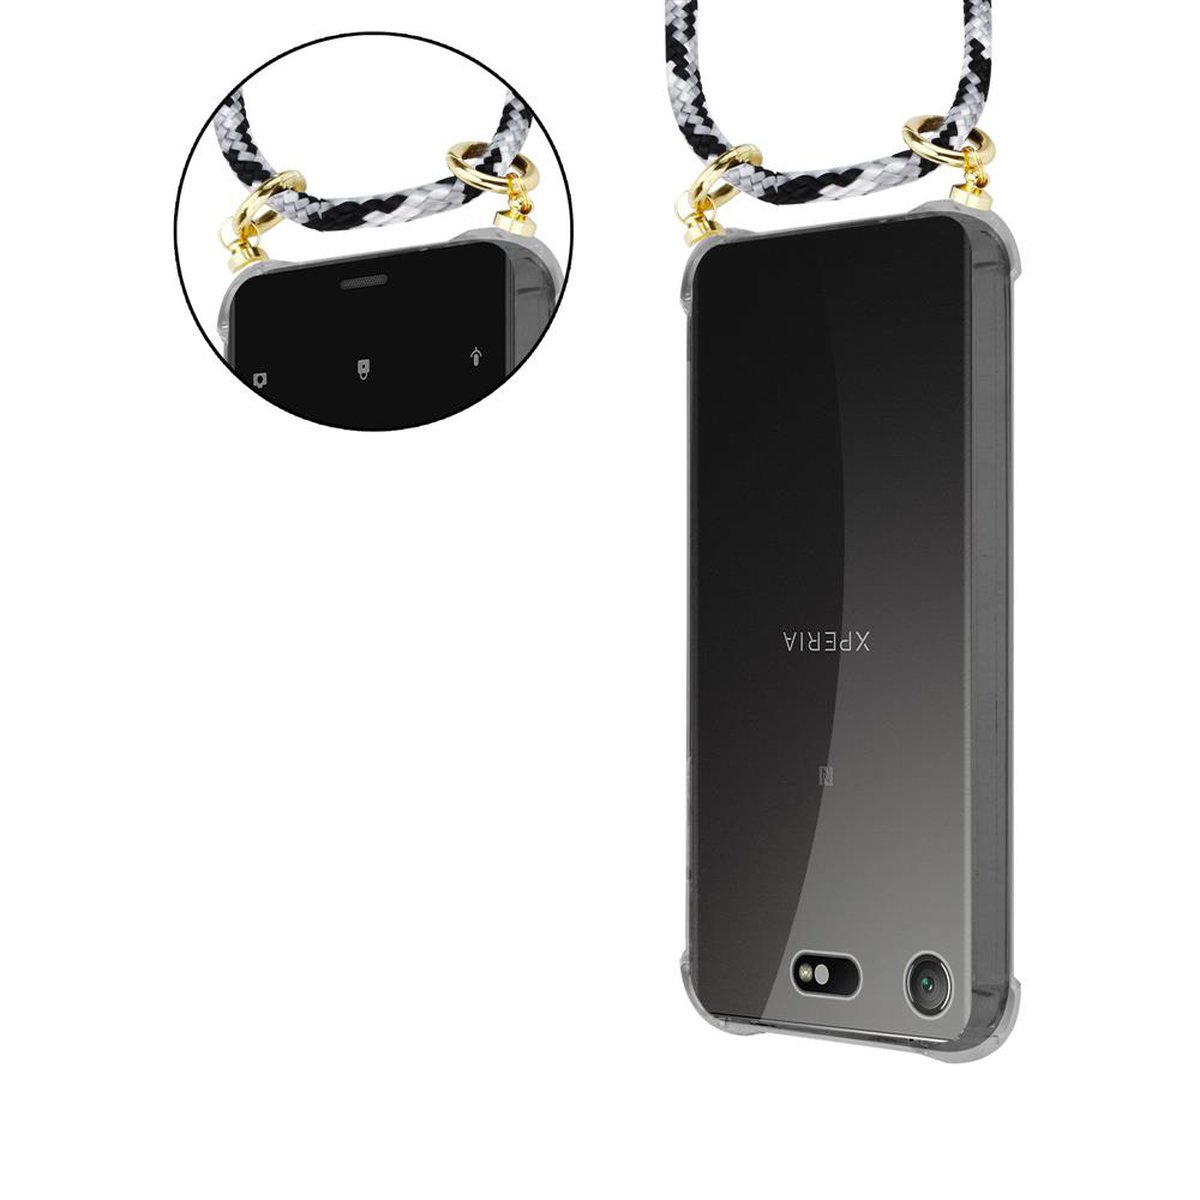 CADORABO Handy Kette SCHWARZ Ringen, Band abnehmbarer und Sony, XZ1 Kordel COMPACT, CAMOUFLAGE Gold mit Hülle, Xperia Backcover